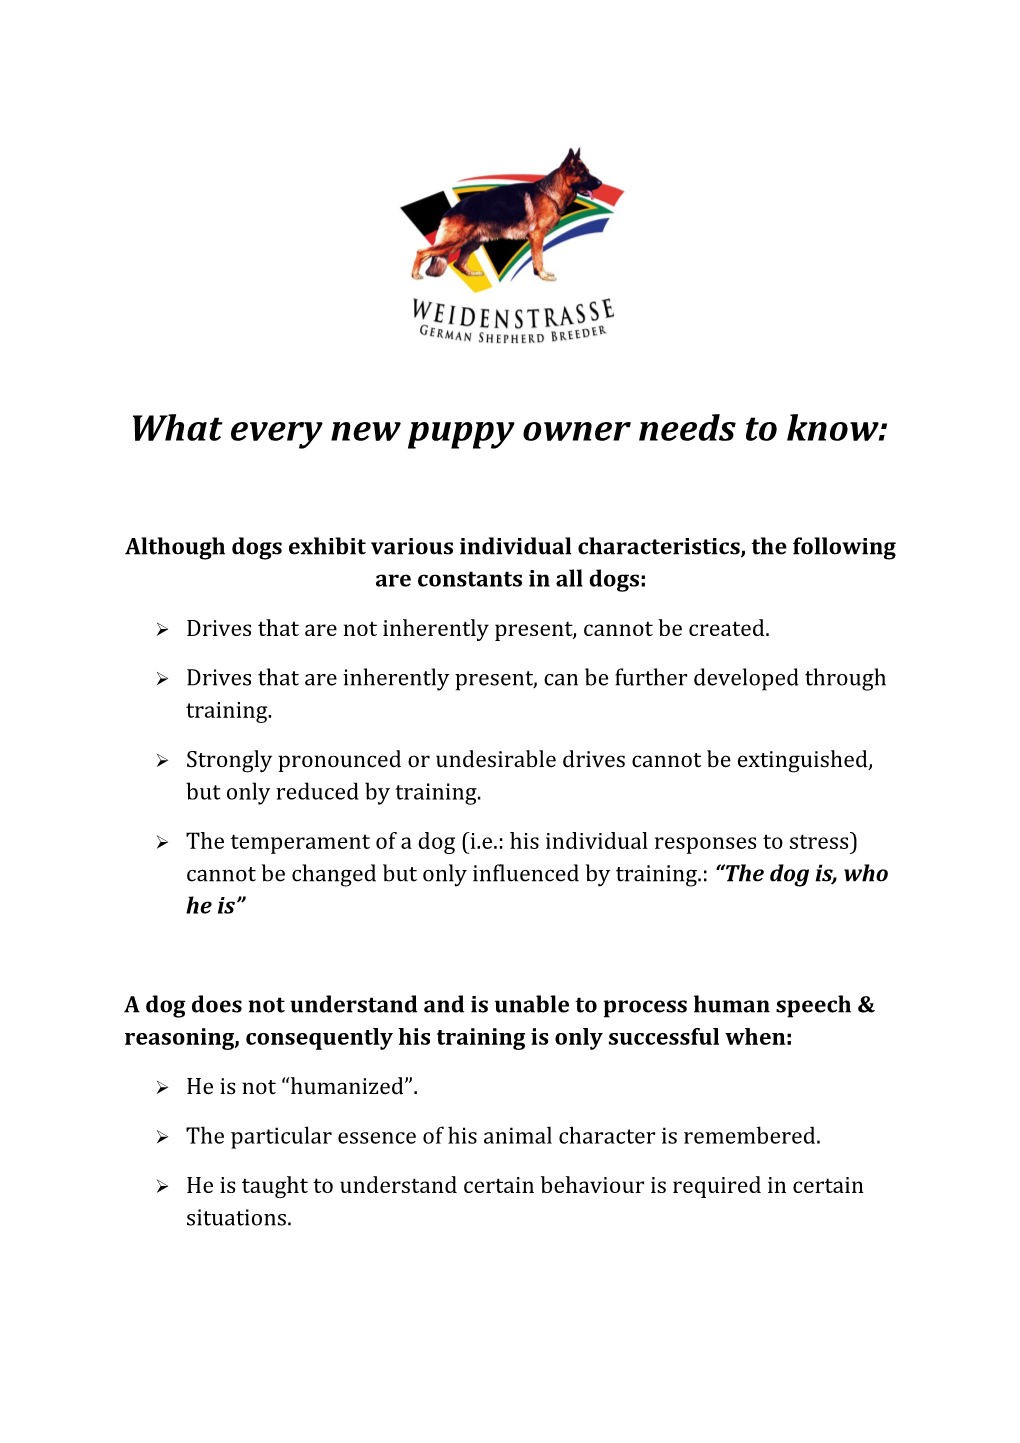 What Every New Puppy Owner Needs to Know